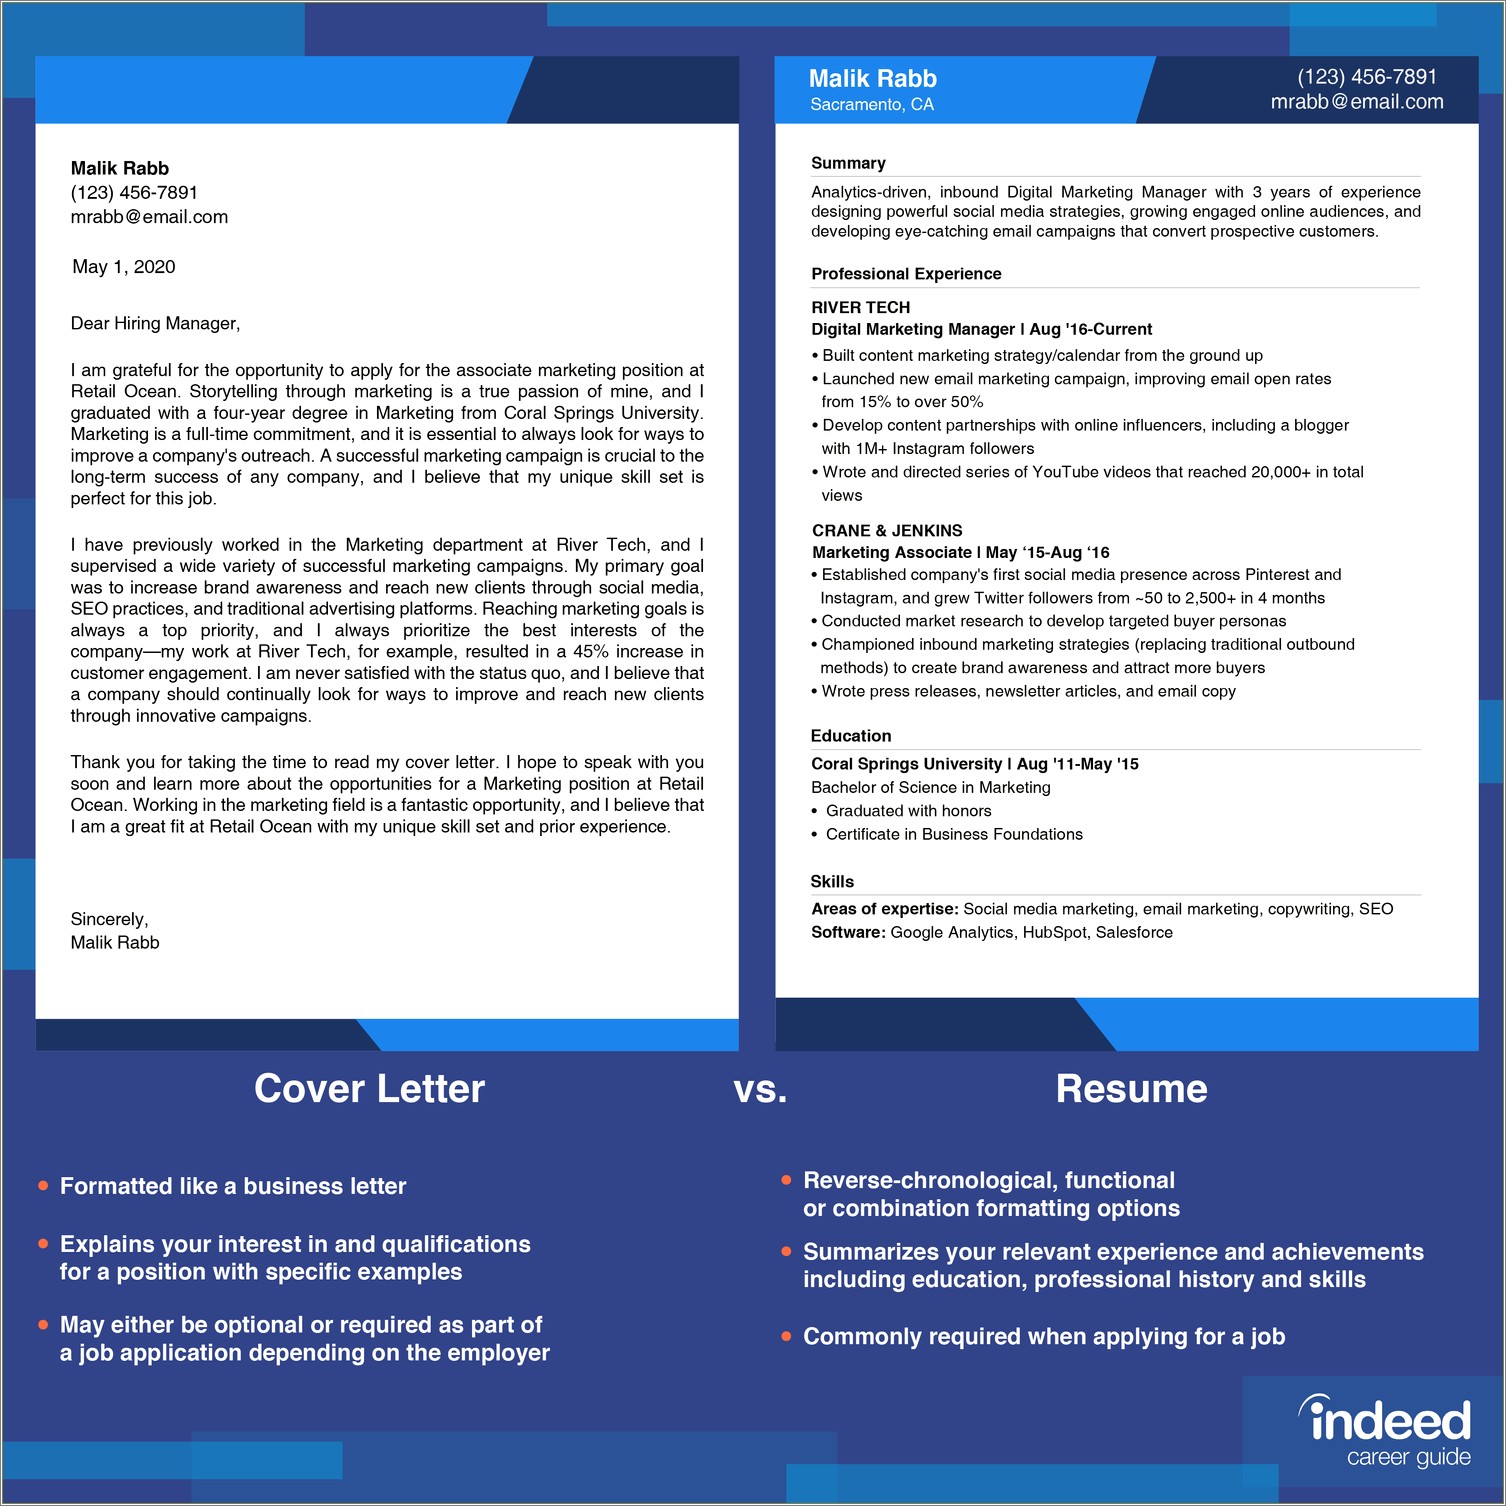 Resume Cover Letter References One Attachment Or Two